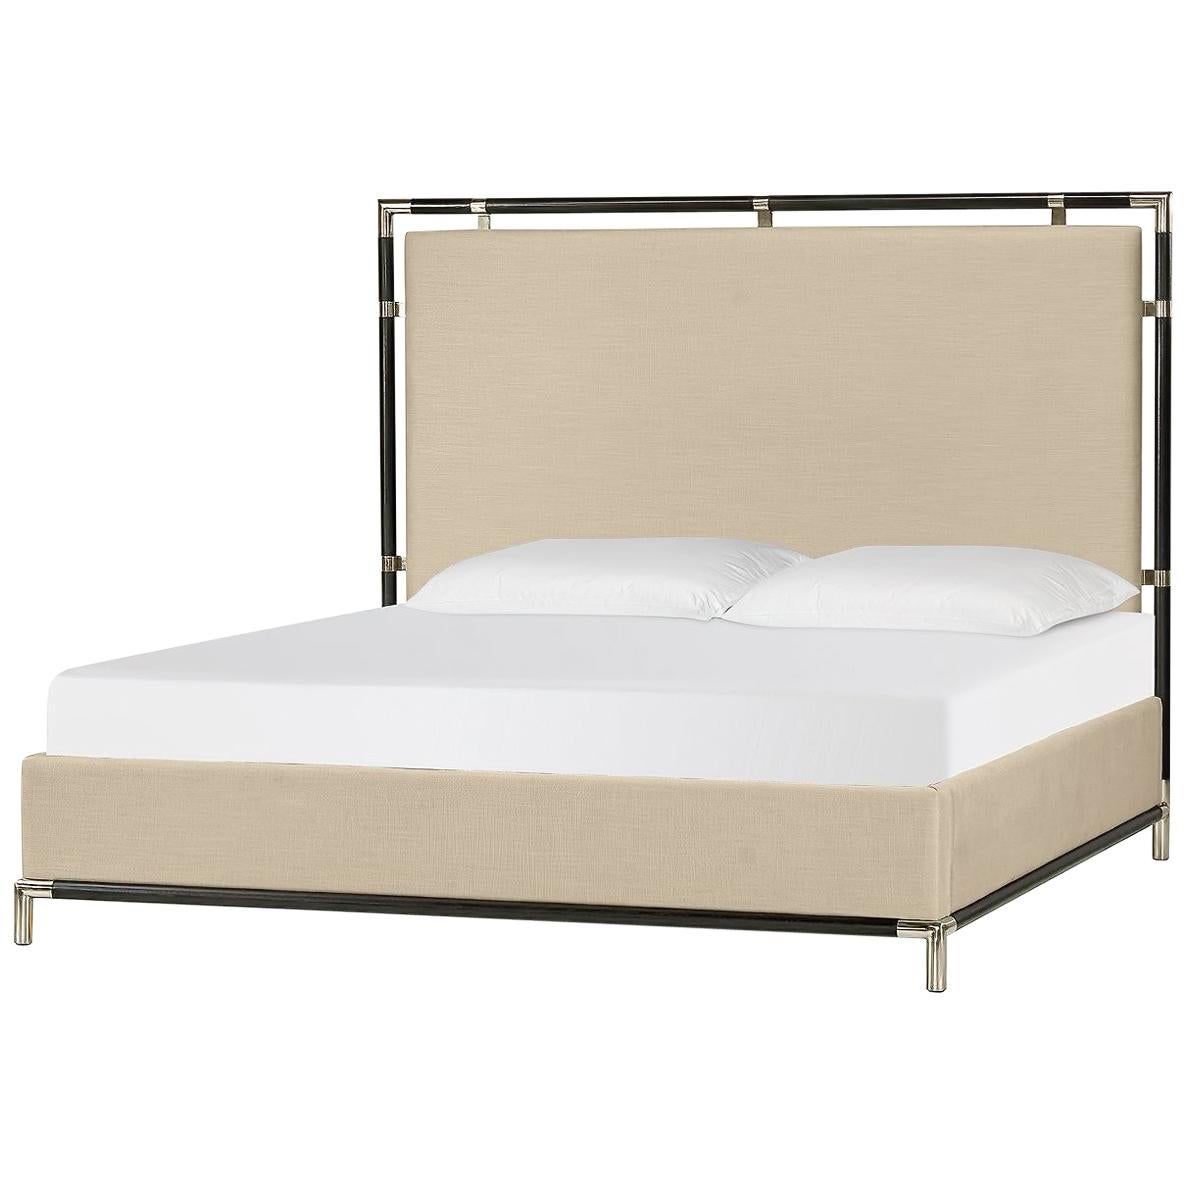 Campaign Style King Size Bed